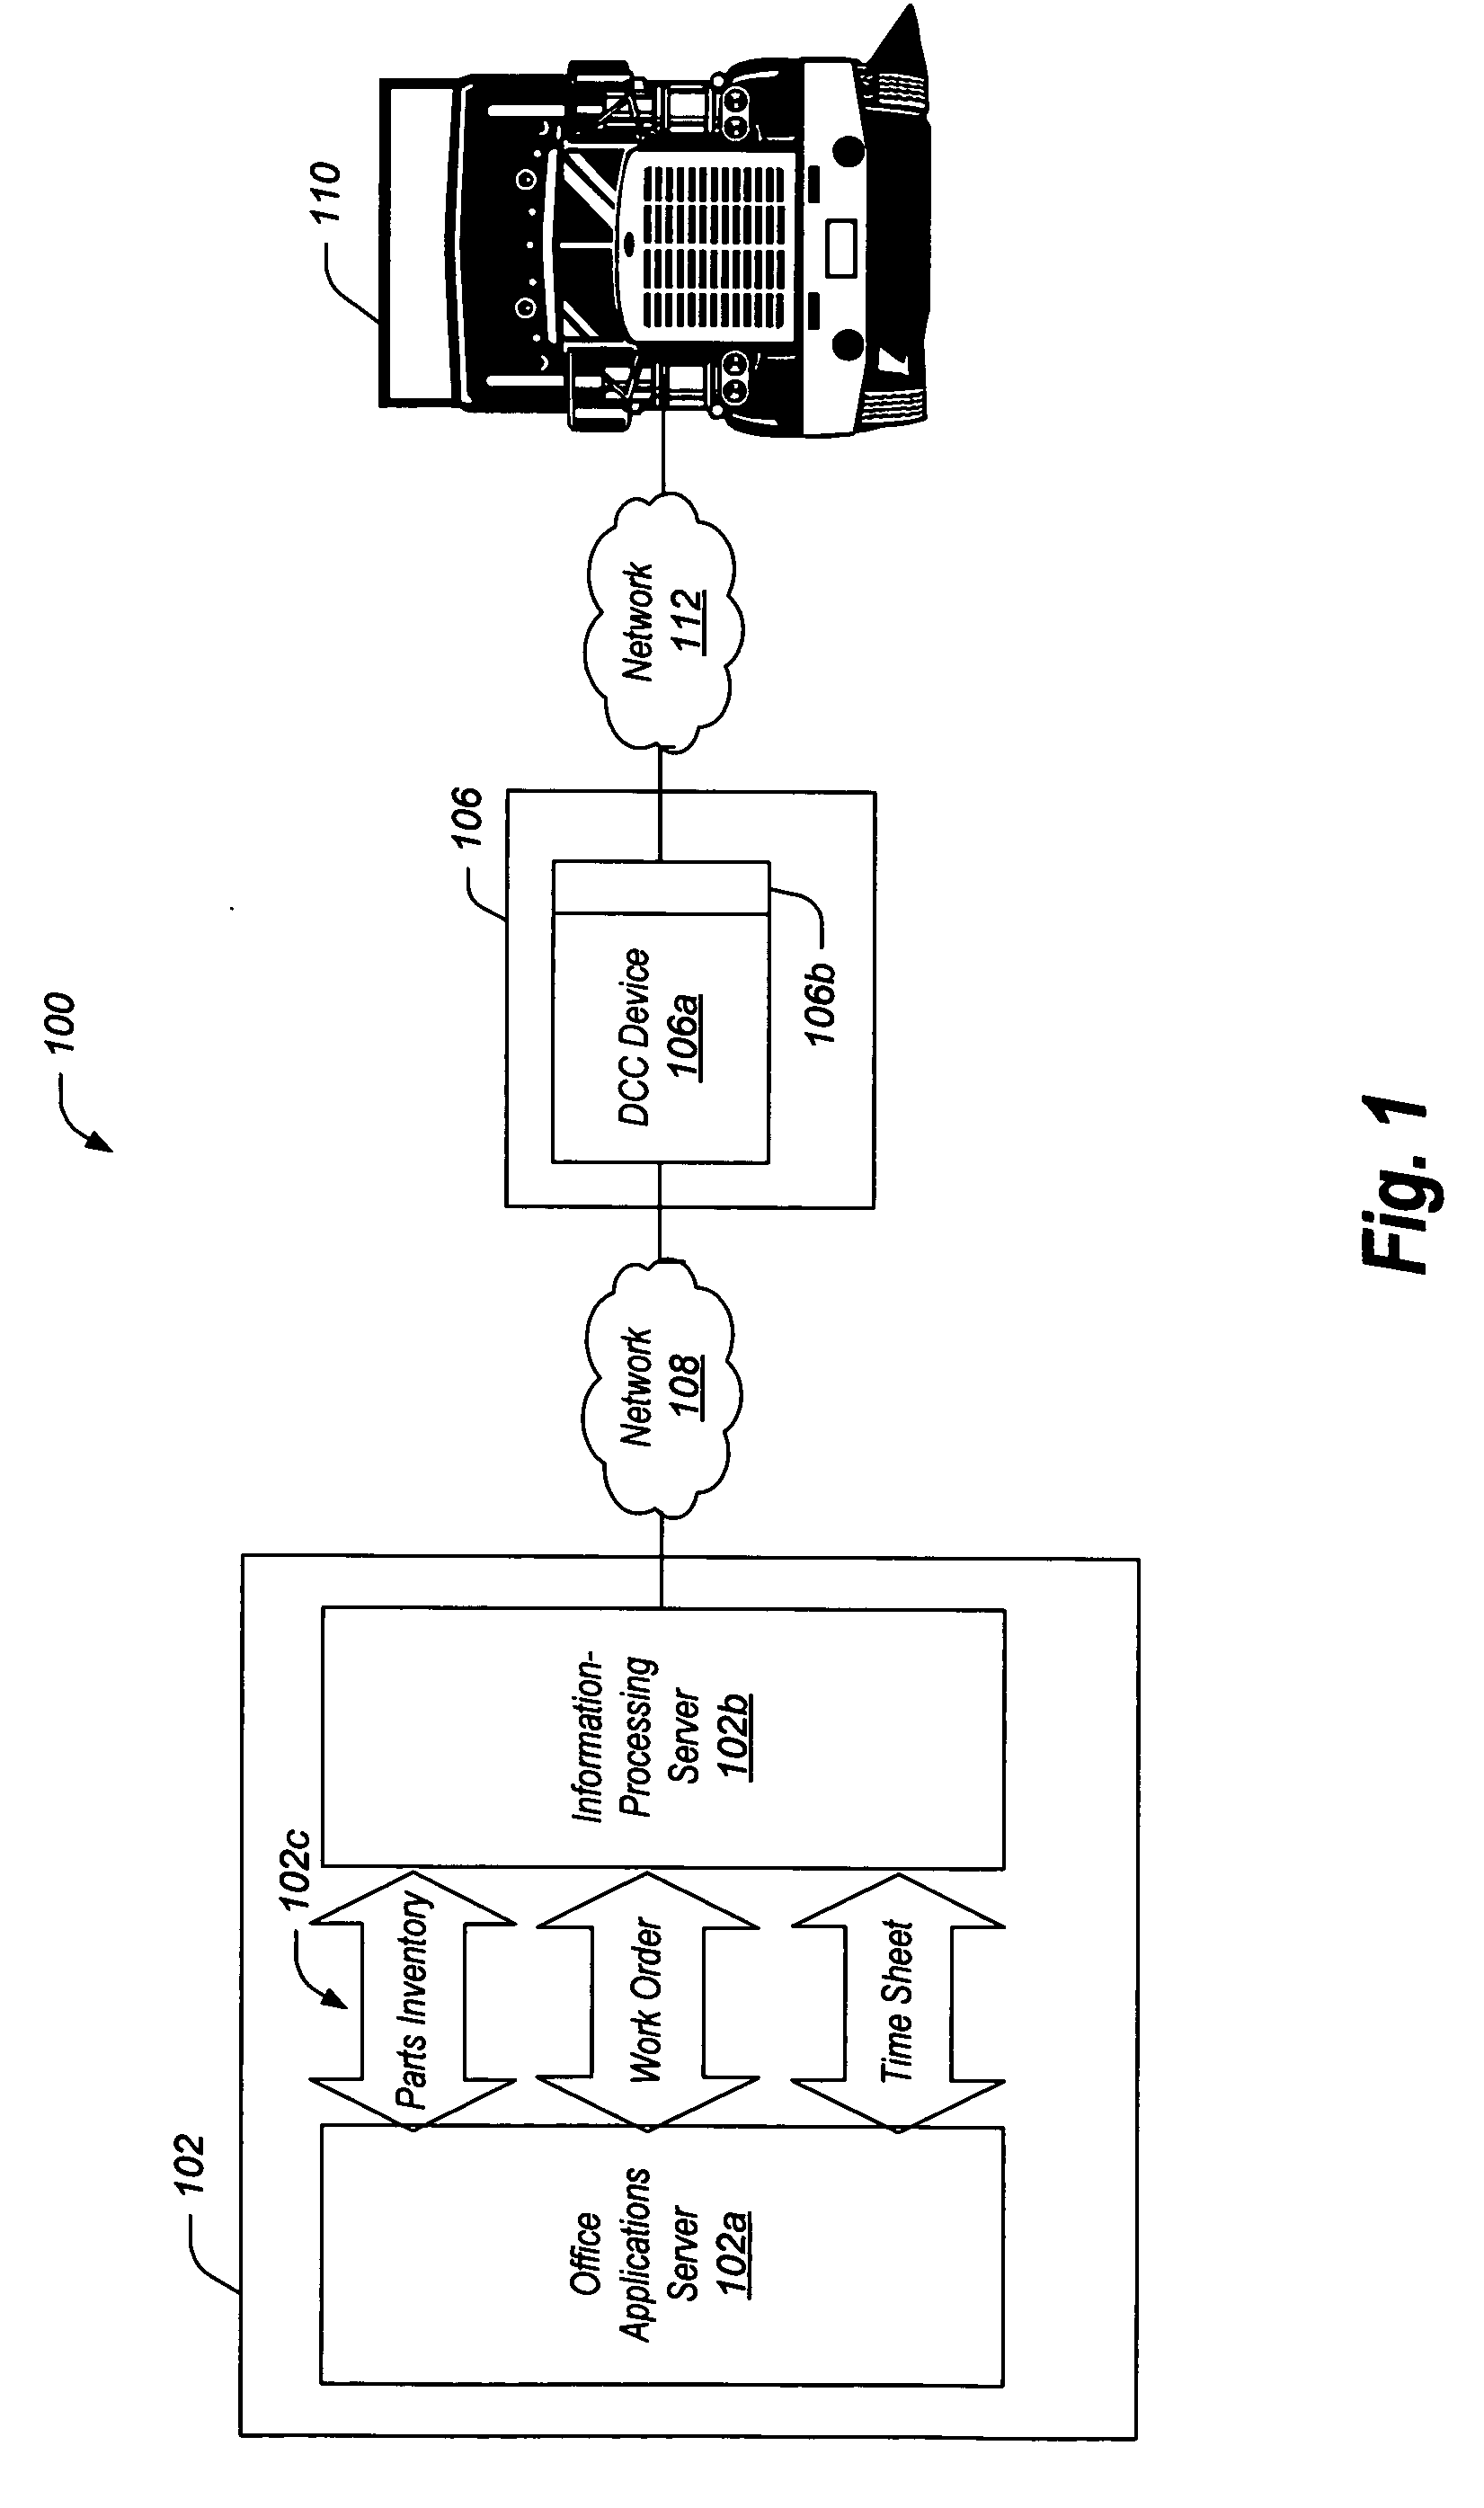 Enterprise resource planning system with integrated vehicle diagnostic and information system